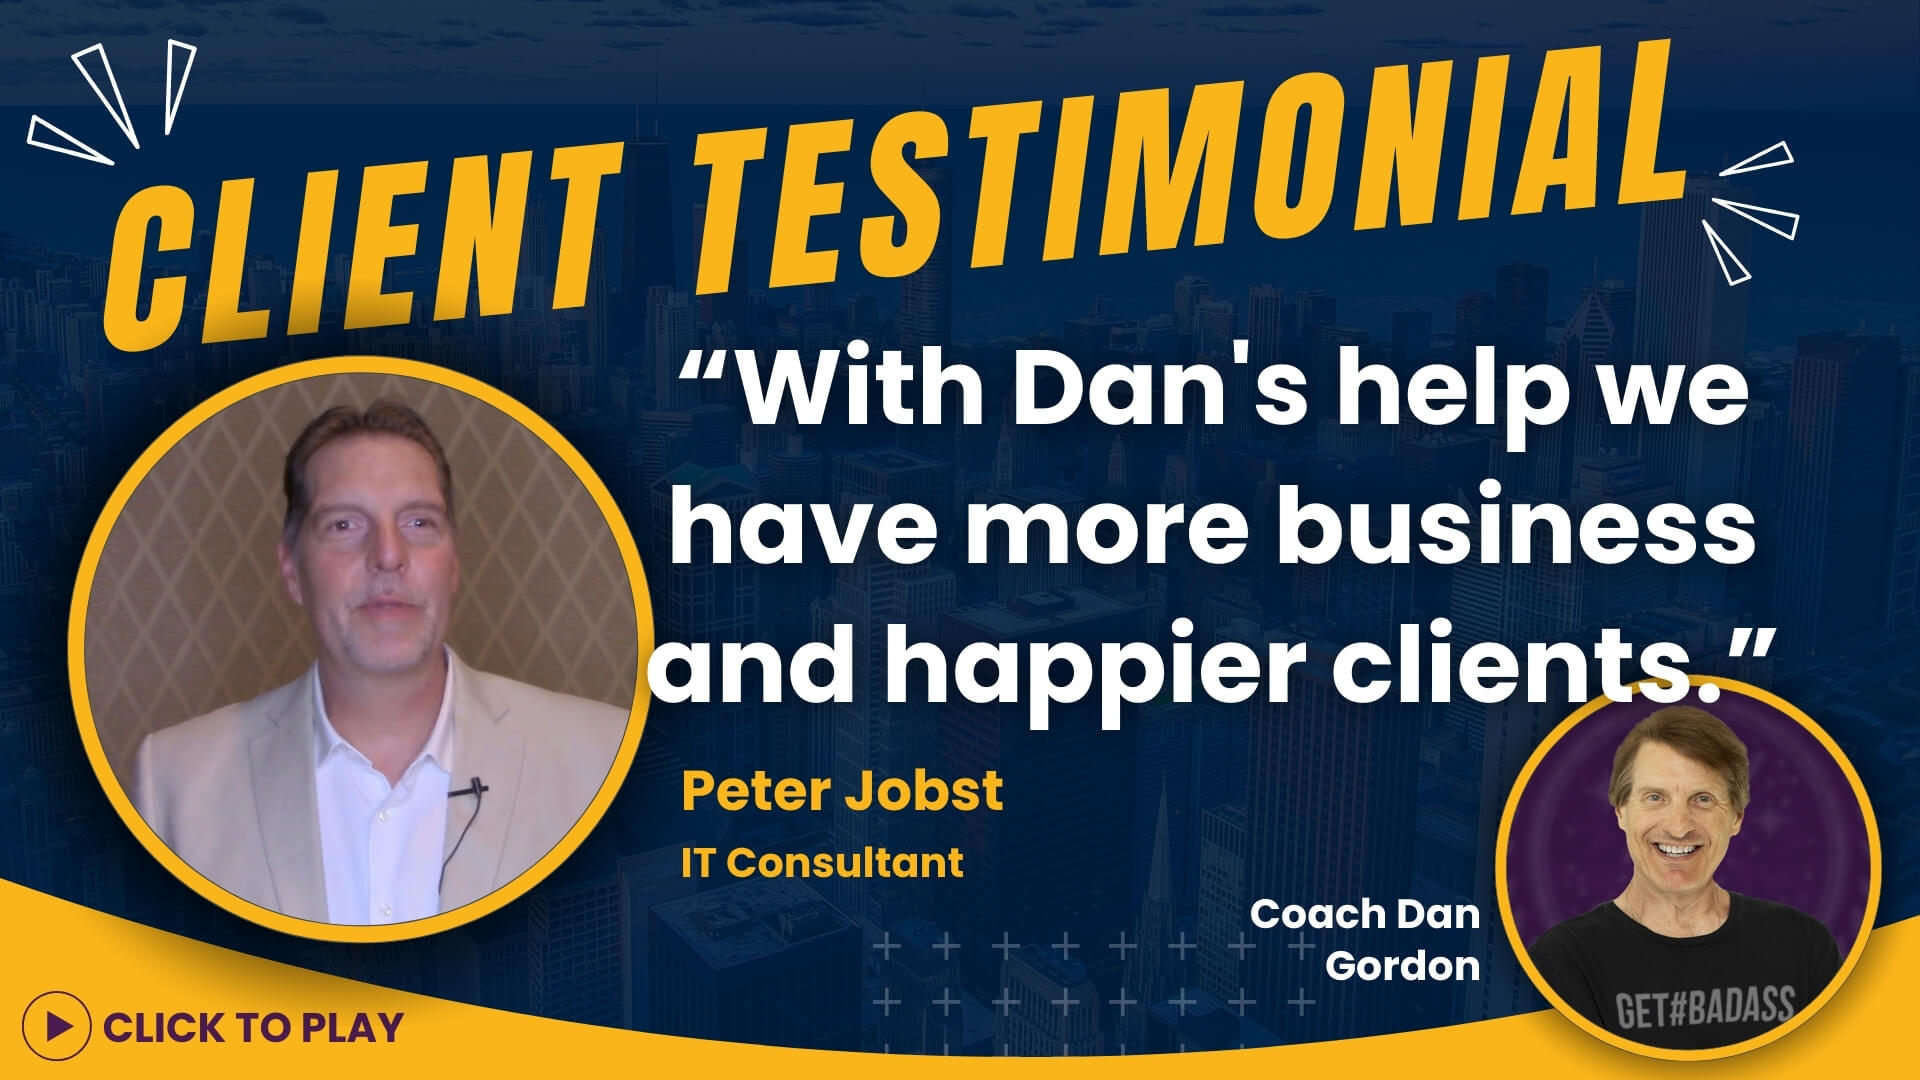 Client testimonial thumbnail featuring Peter Jobst, IT Consultant, praising Coach Dan Gordon's influence on business and client satisfaction.